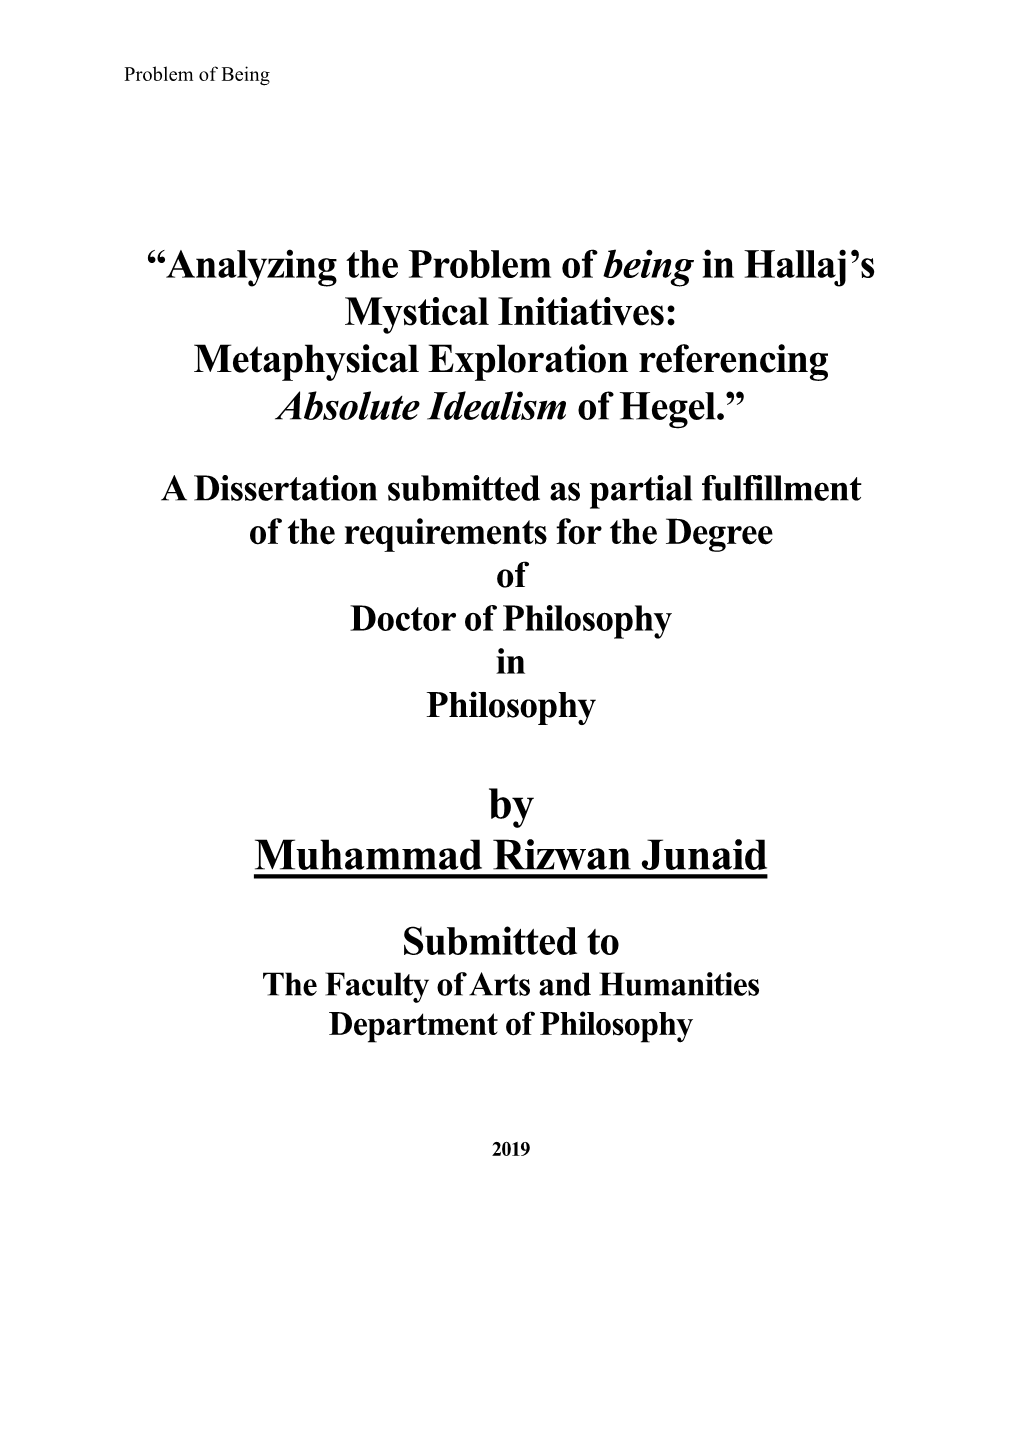 Analyzing the Problem of Being in Hallaj's Mystical Initiatives